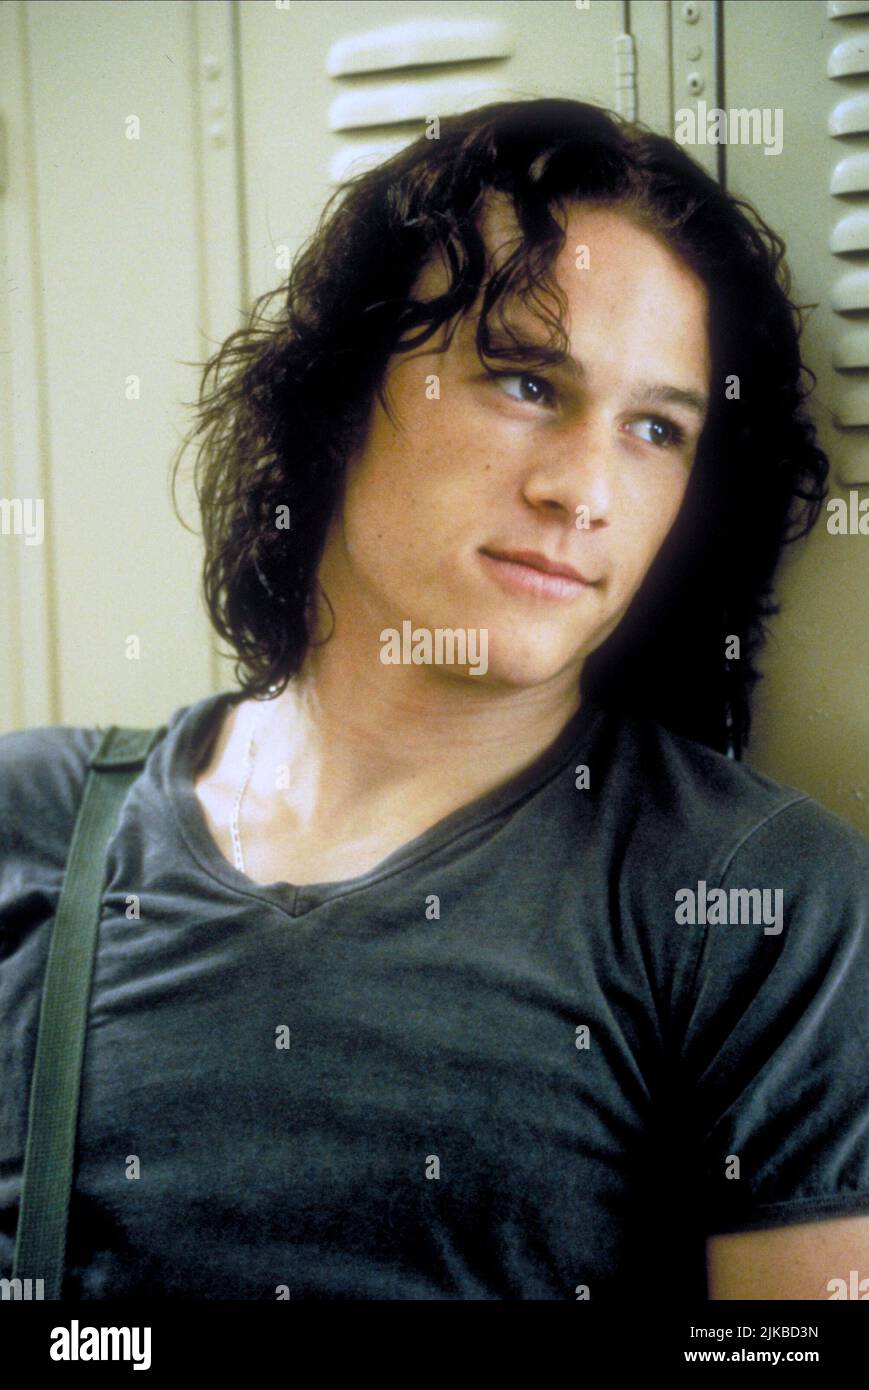 10 things i hate about you movie hi-res stock photography and images - Alamy